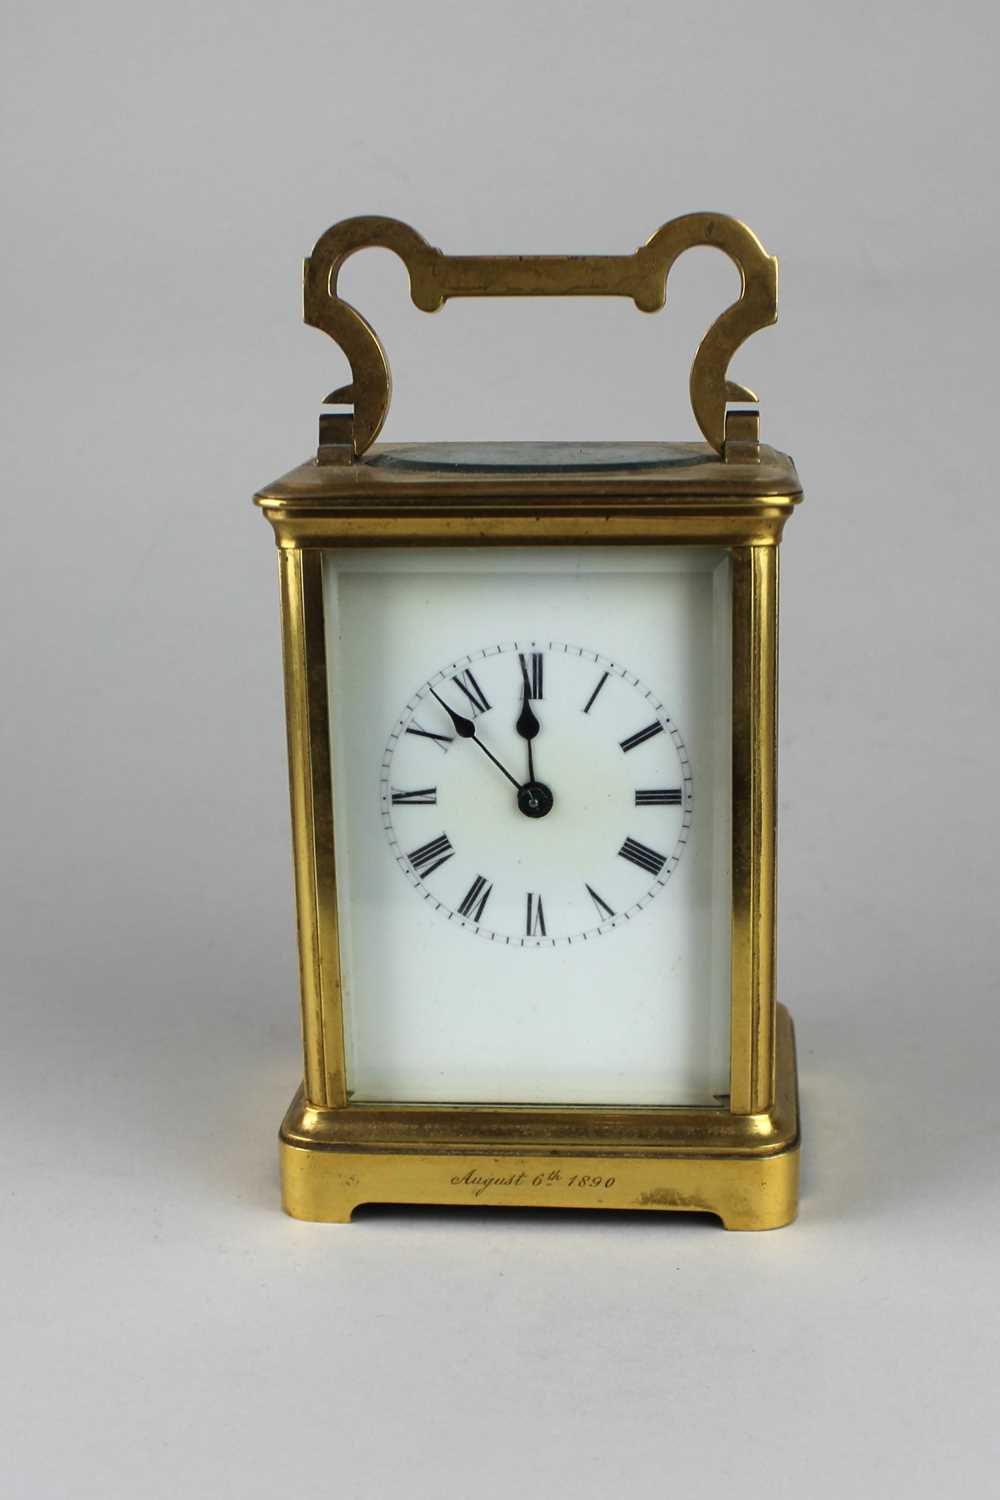 A 19th century French gilt brass carriage clock, the white enamel dial with Roman numerals, striking